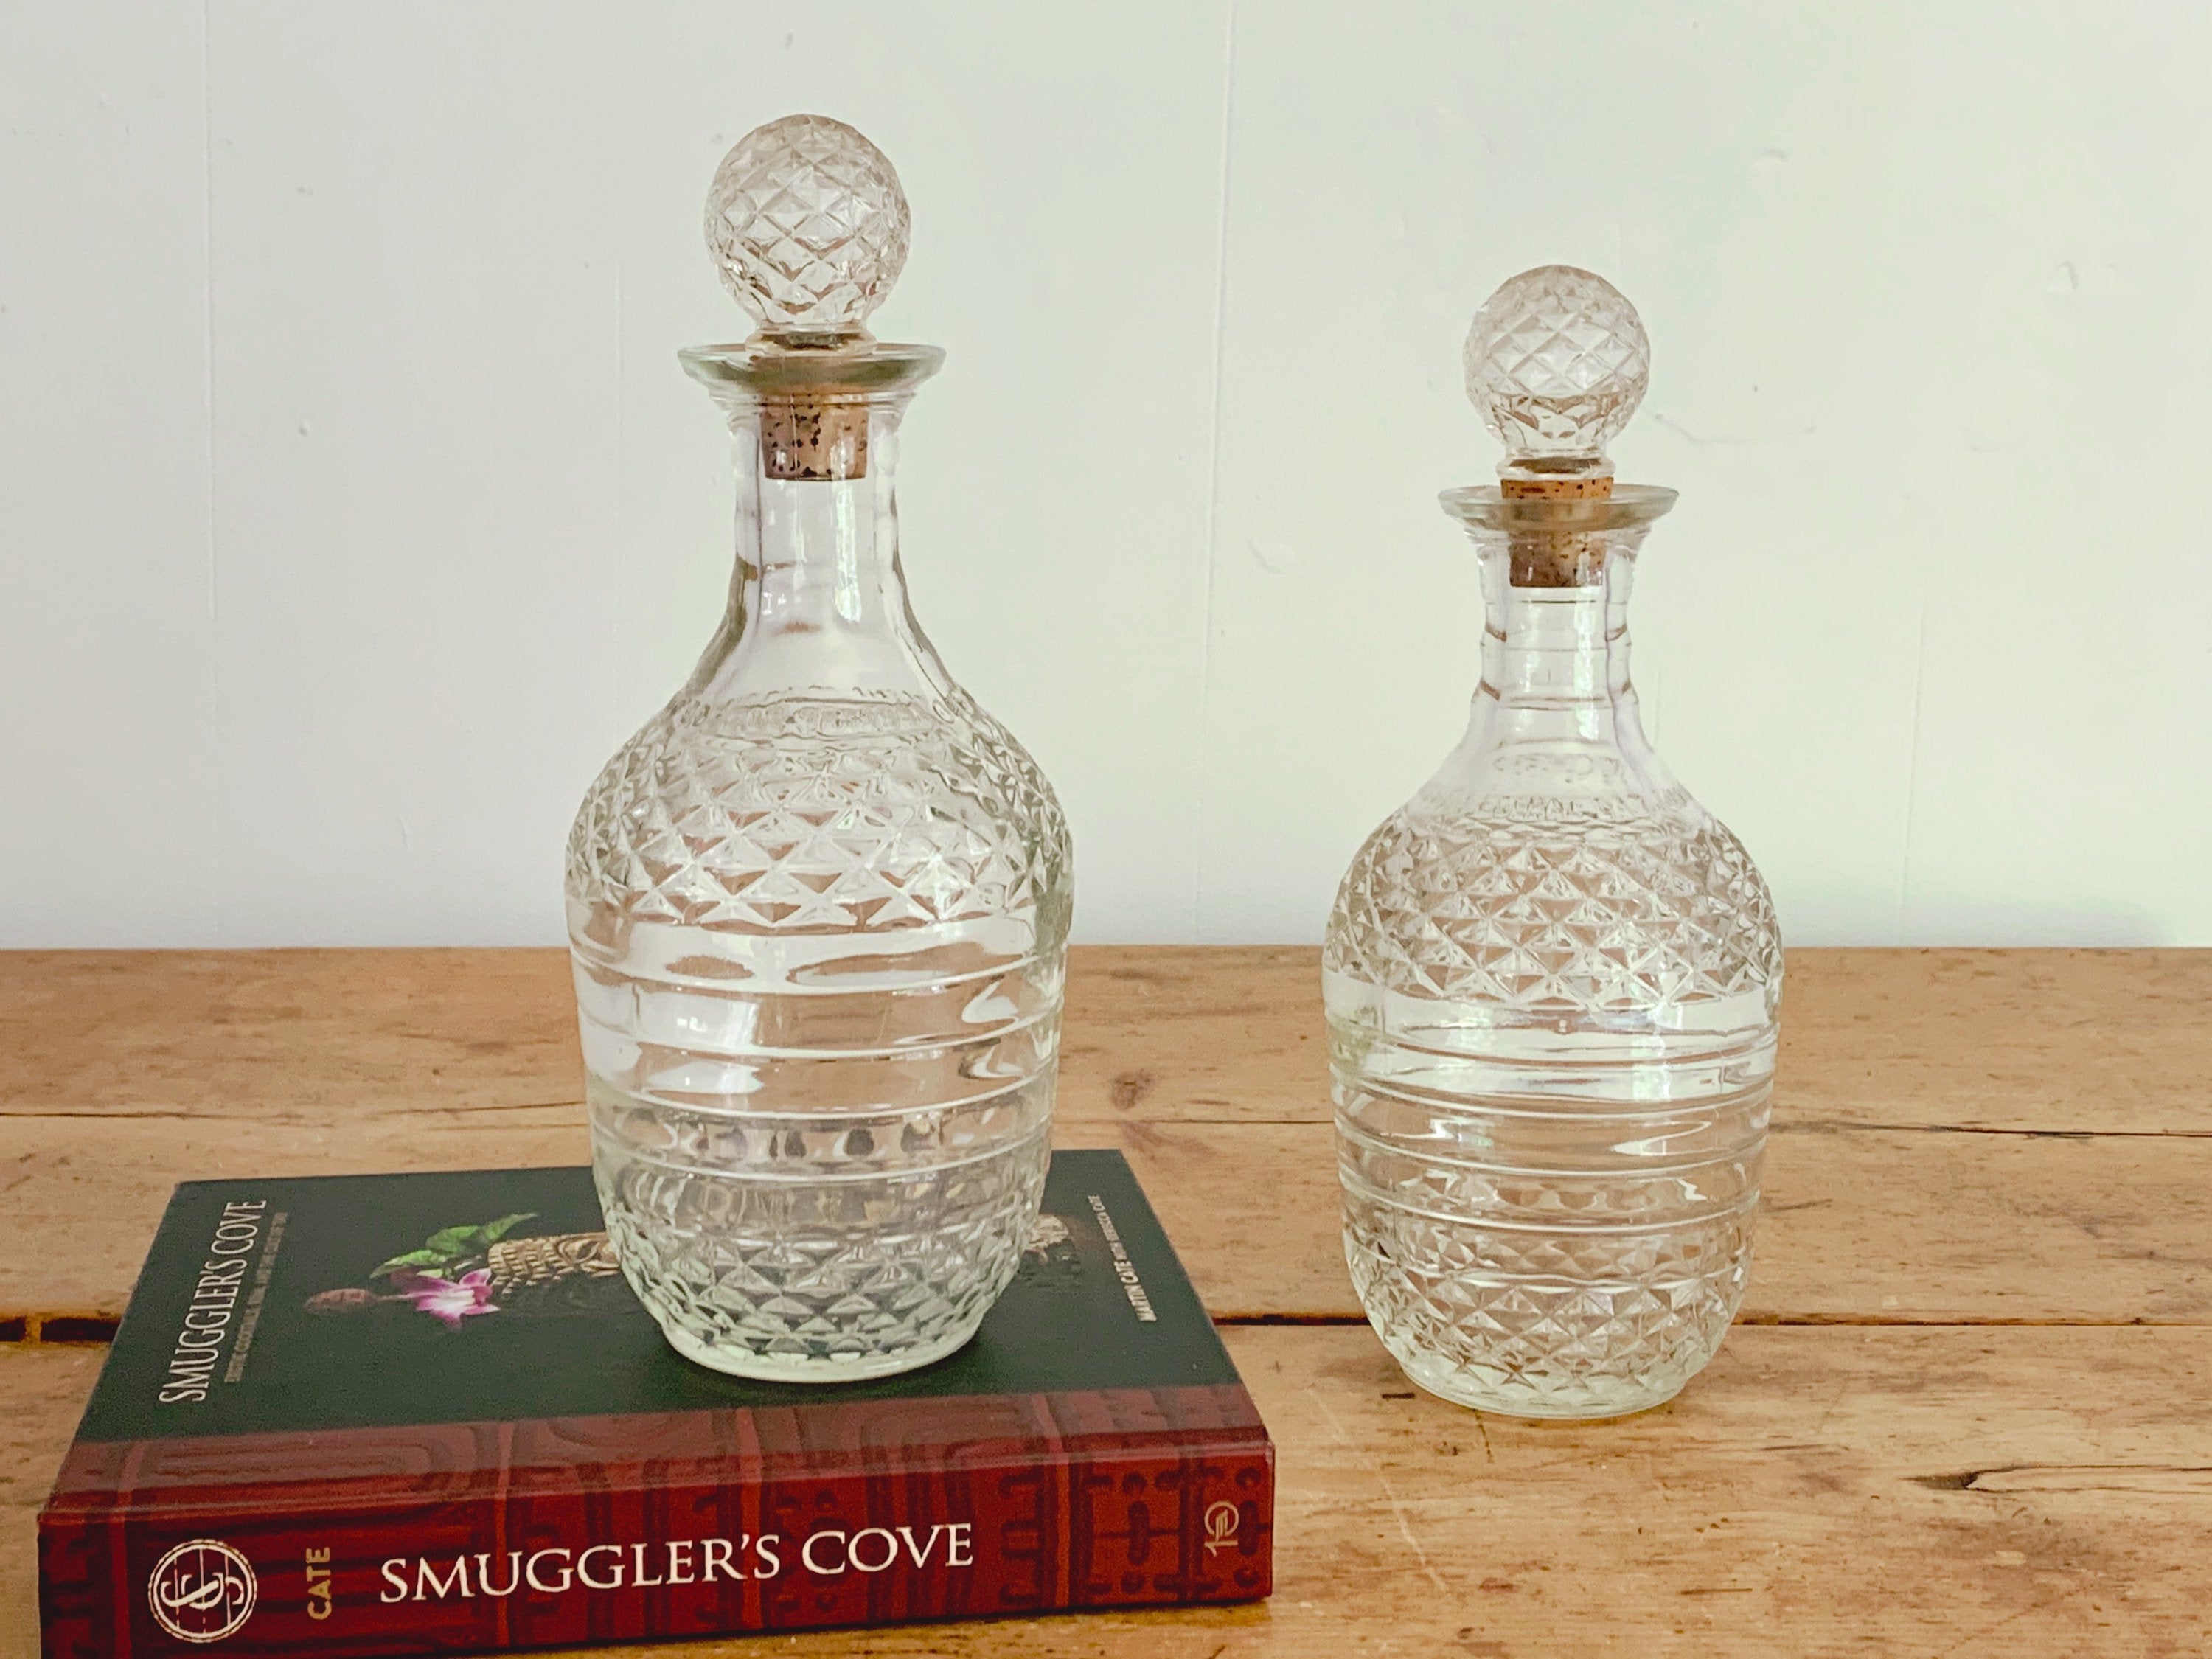 Vintage Pressed Glass Liquor Bottle Decanters with Facetted Round Stopper | Whiskey Decanter Barware Home Bar Decor | Gift for Him